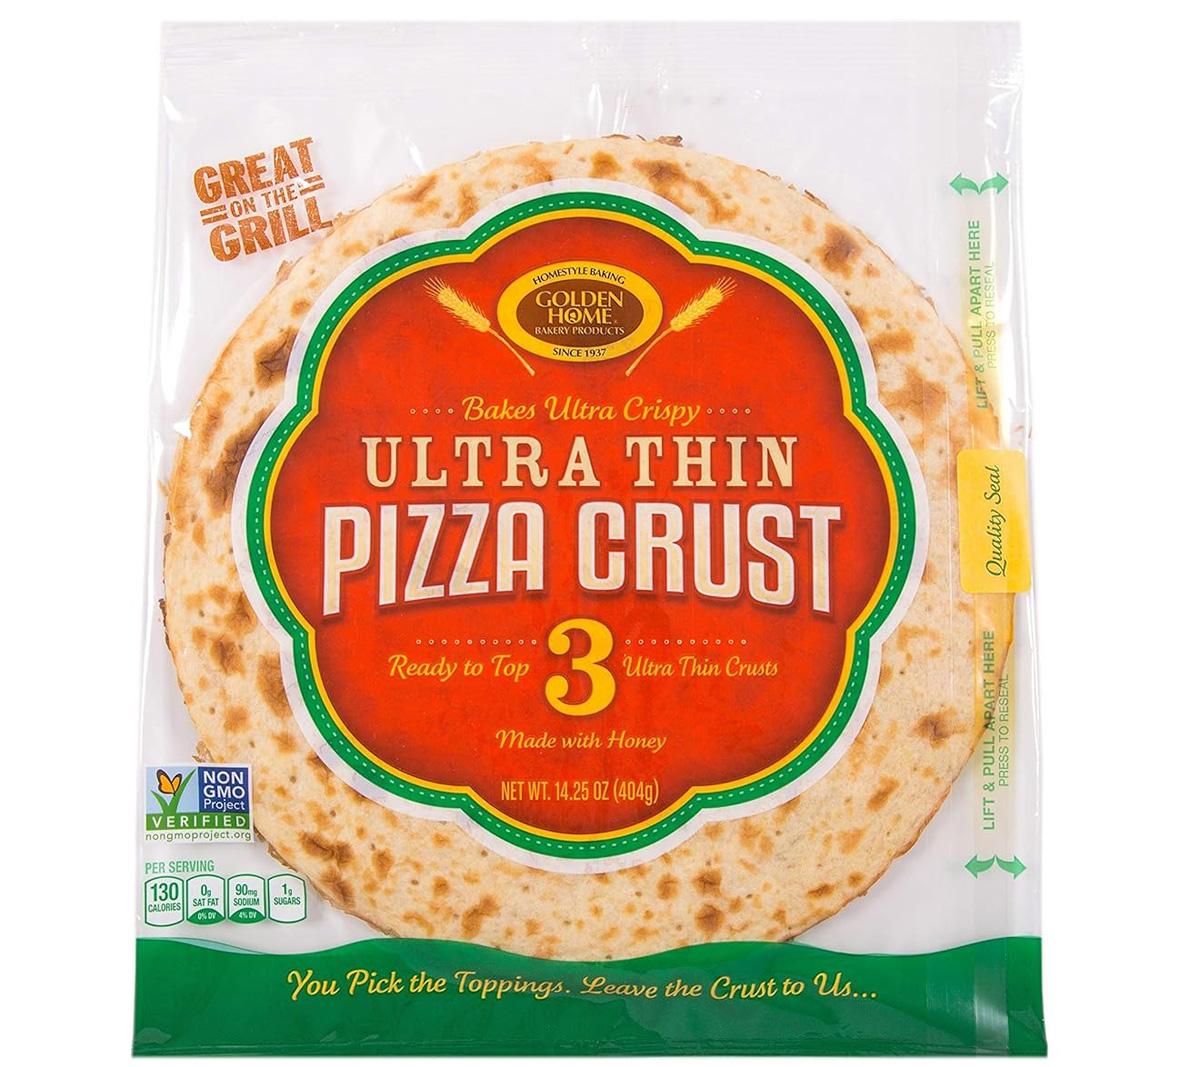 Golden Home Bakery Products Ultra Thin Pizza Crust 3 Pack for $4.08